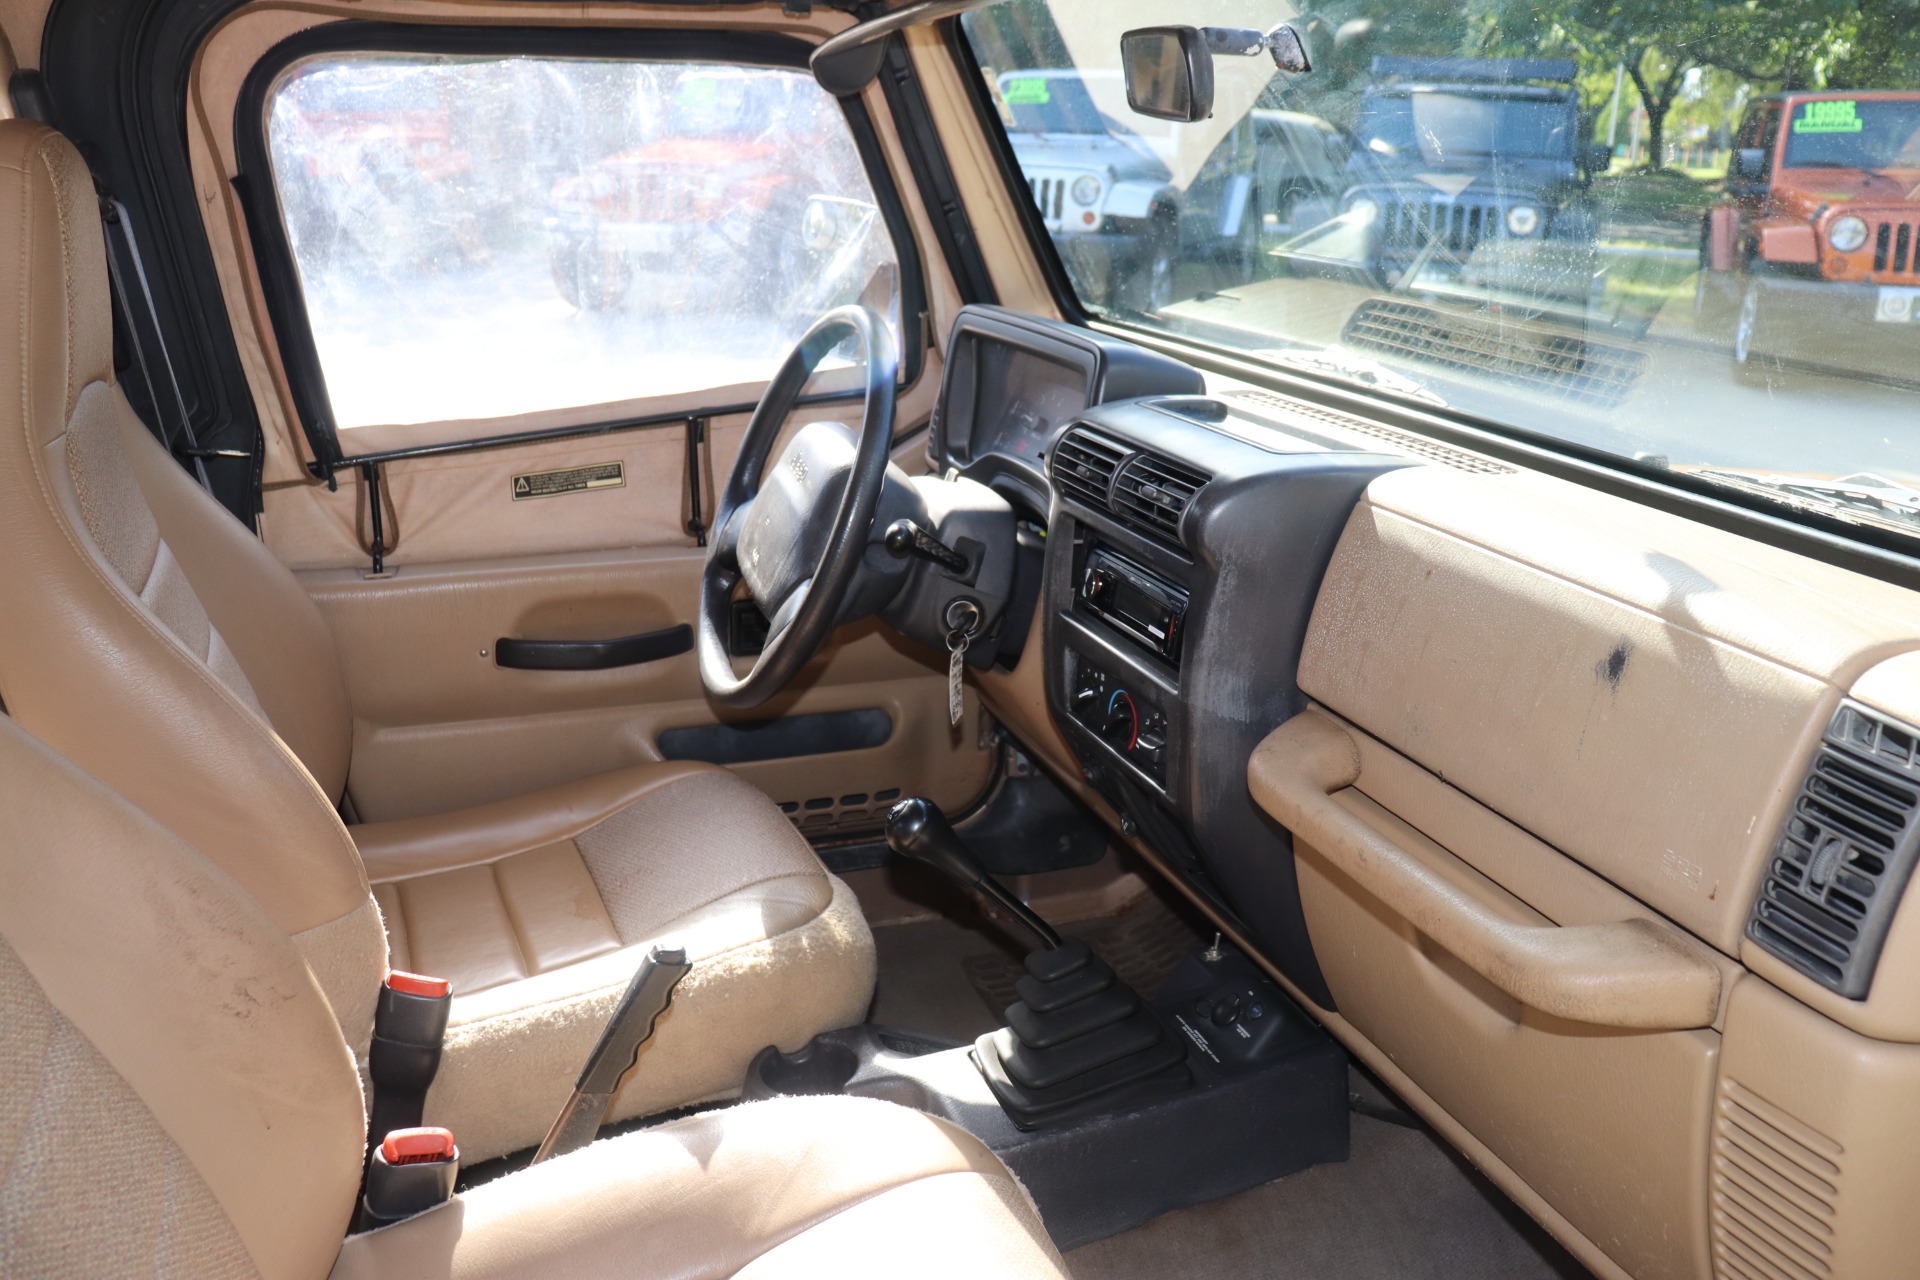 Used 1999 Jeep Wrangler SE For Sale ($6,995) | Select Jeeps Inc. Stock  #412144